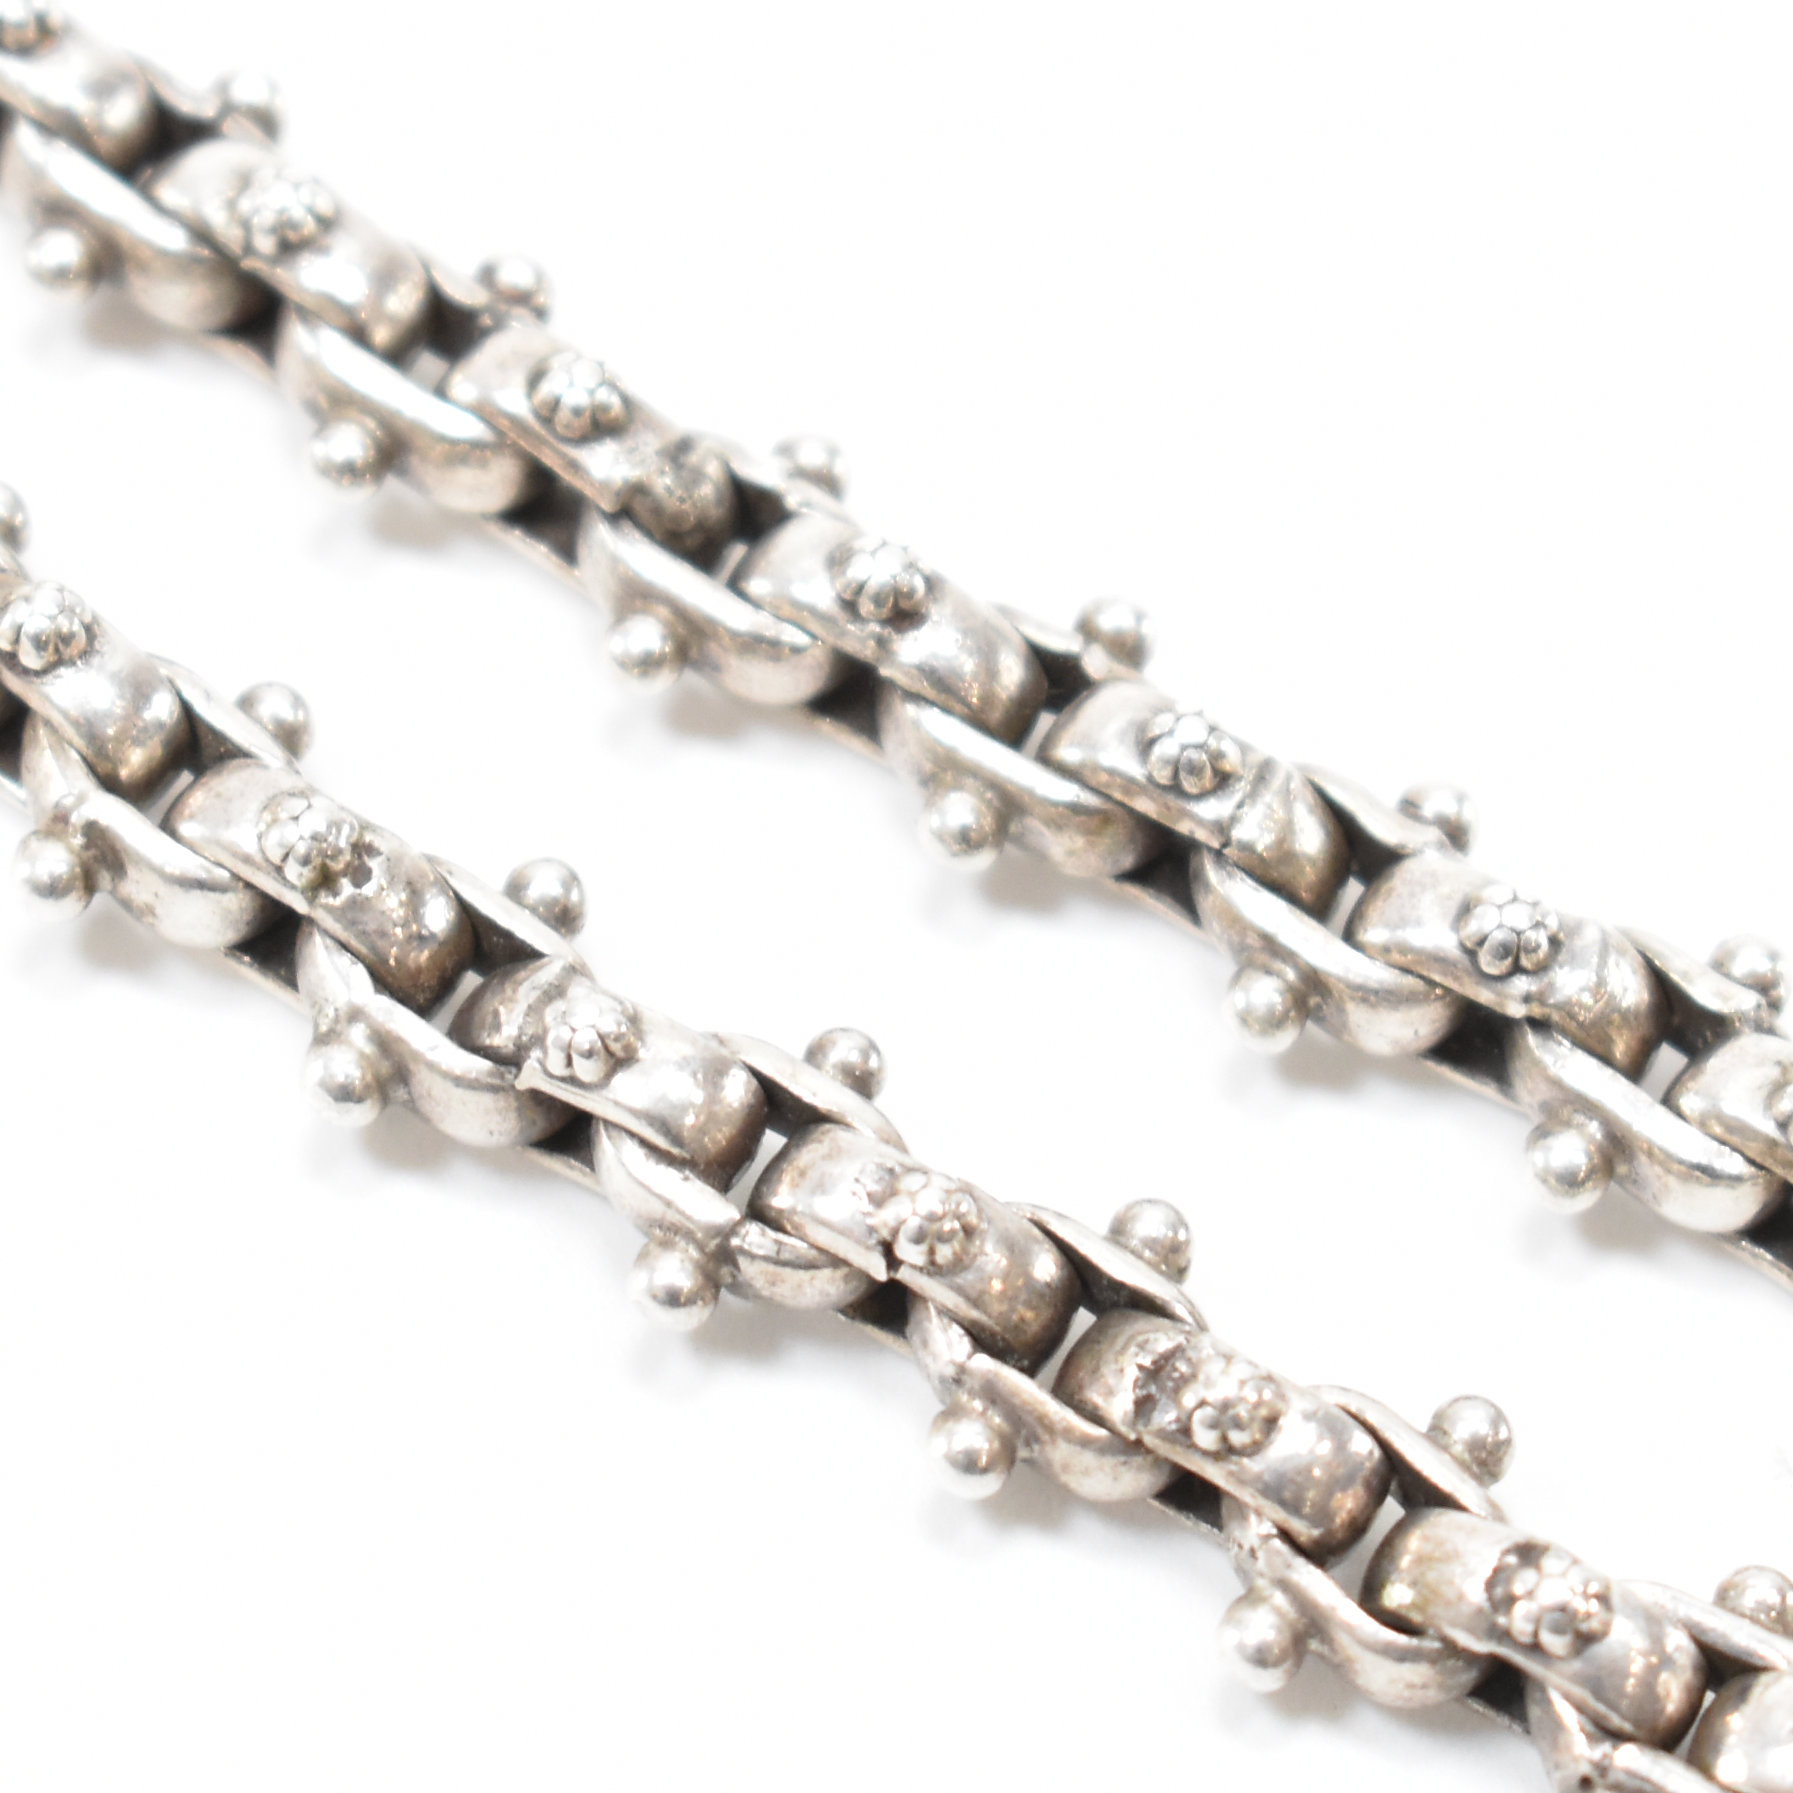 PAIR OF SILVER CHAIN BRACELETS - Image 2 of 5